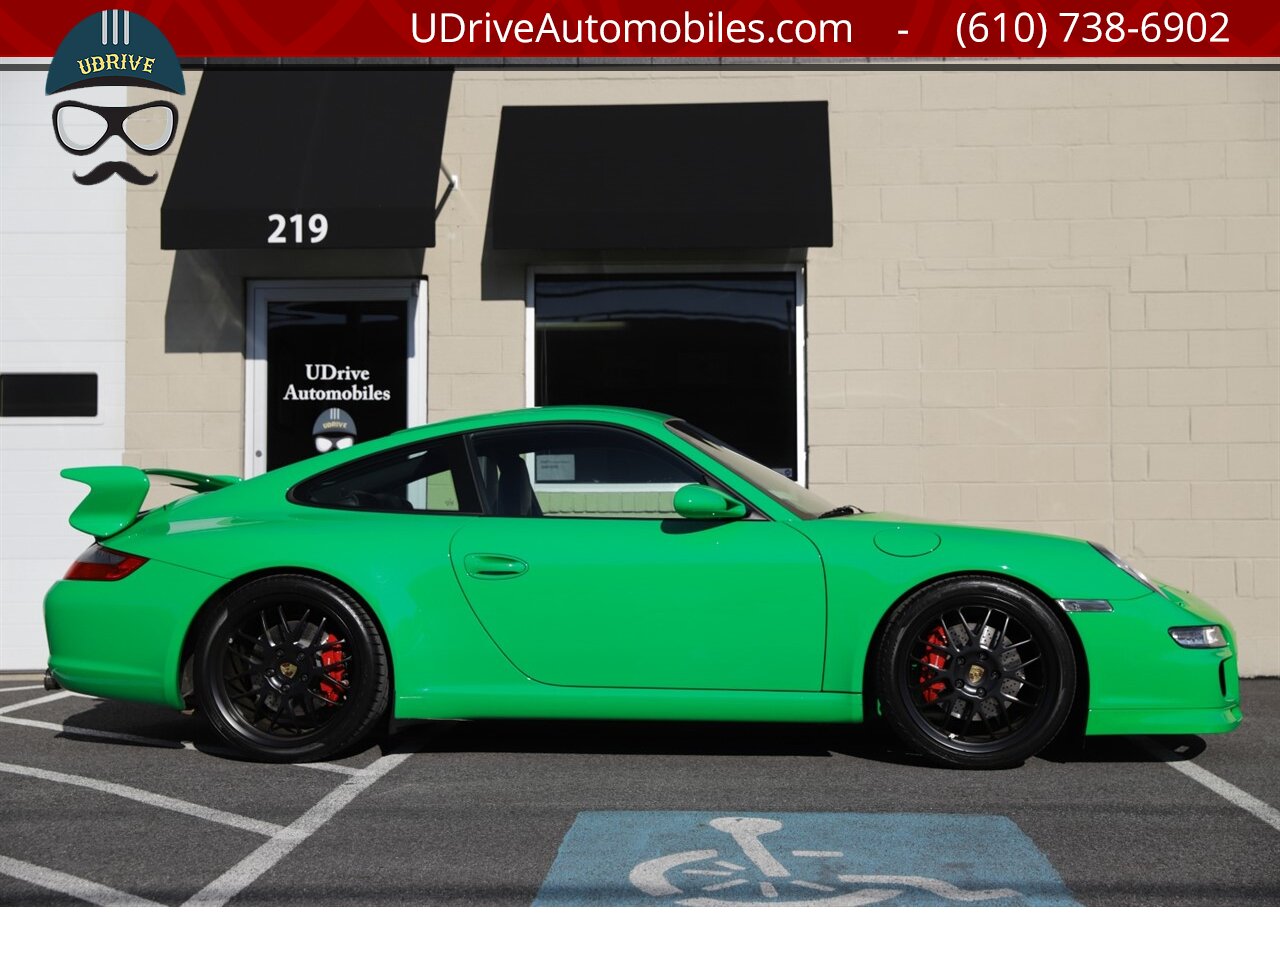 2008 Porsche 911 S 997 6Sp PTS RS Green AeroKit 1of a Kind  $118k MSRP Champion F77 Pkg RG5 Whls - Photo 18 - West Chester, PA 19382